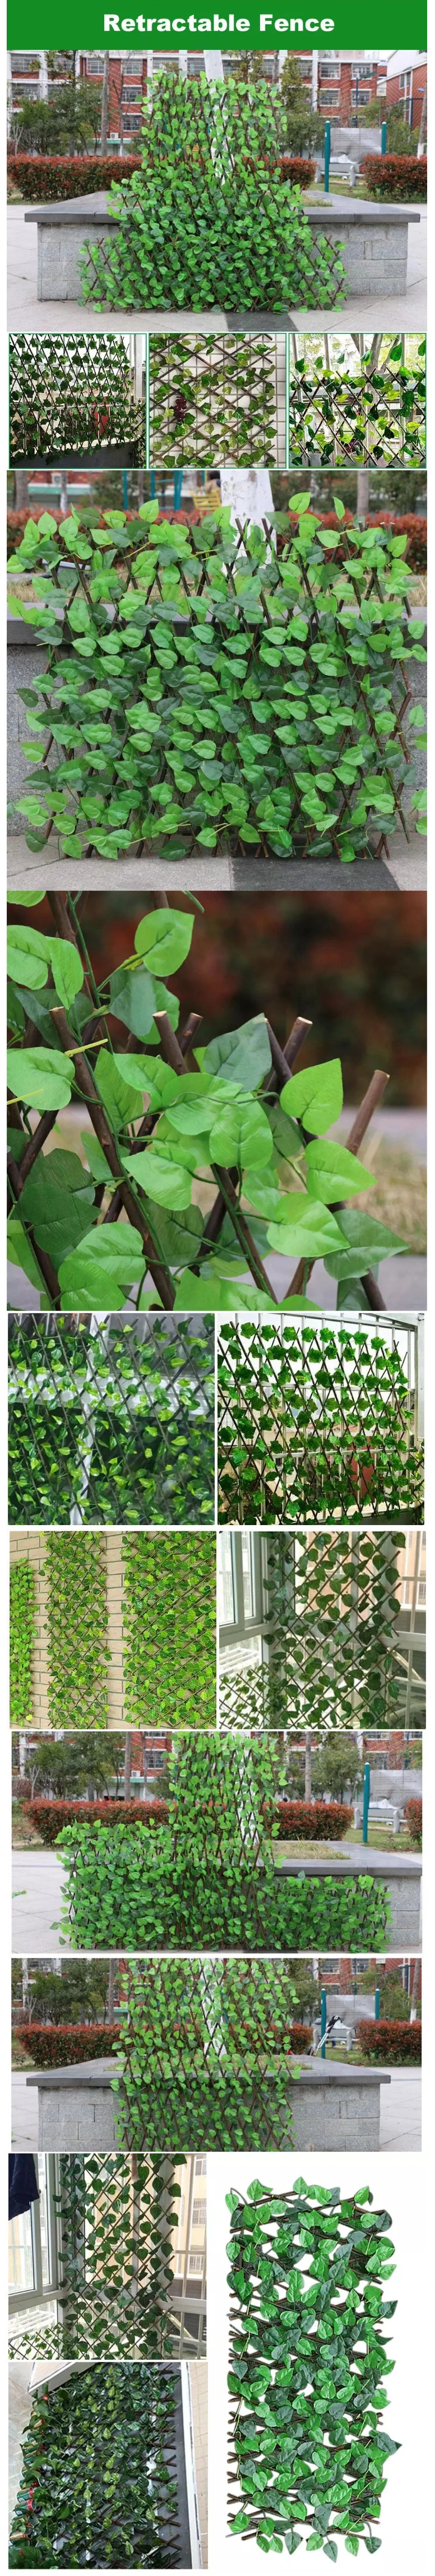 Artificial Hedges Faux IVY Leaves Fence for Privacy Screen Decorative